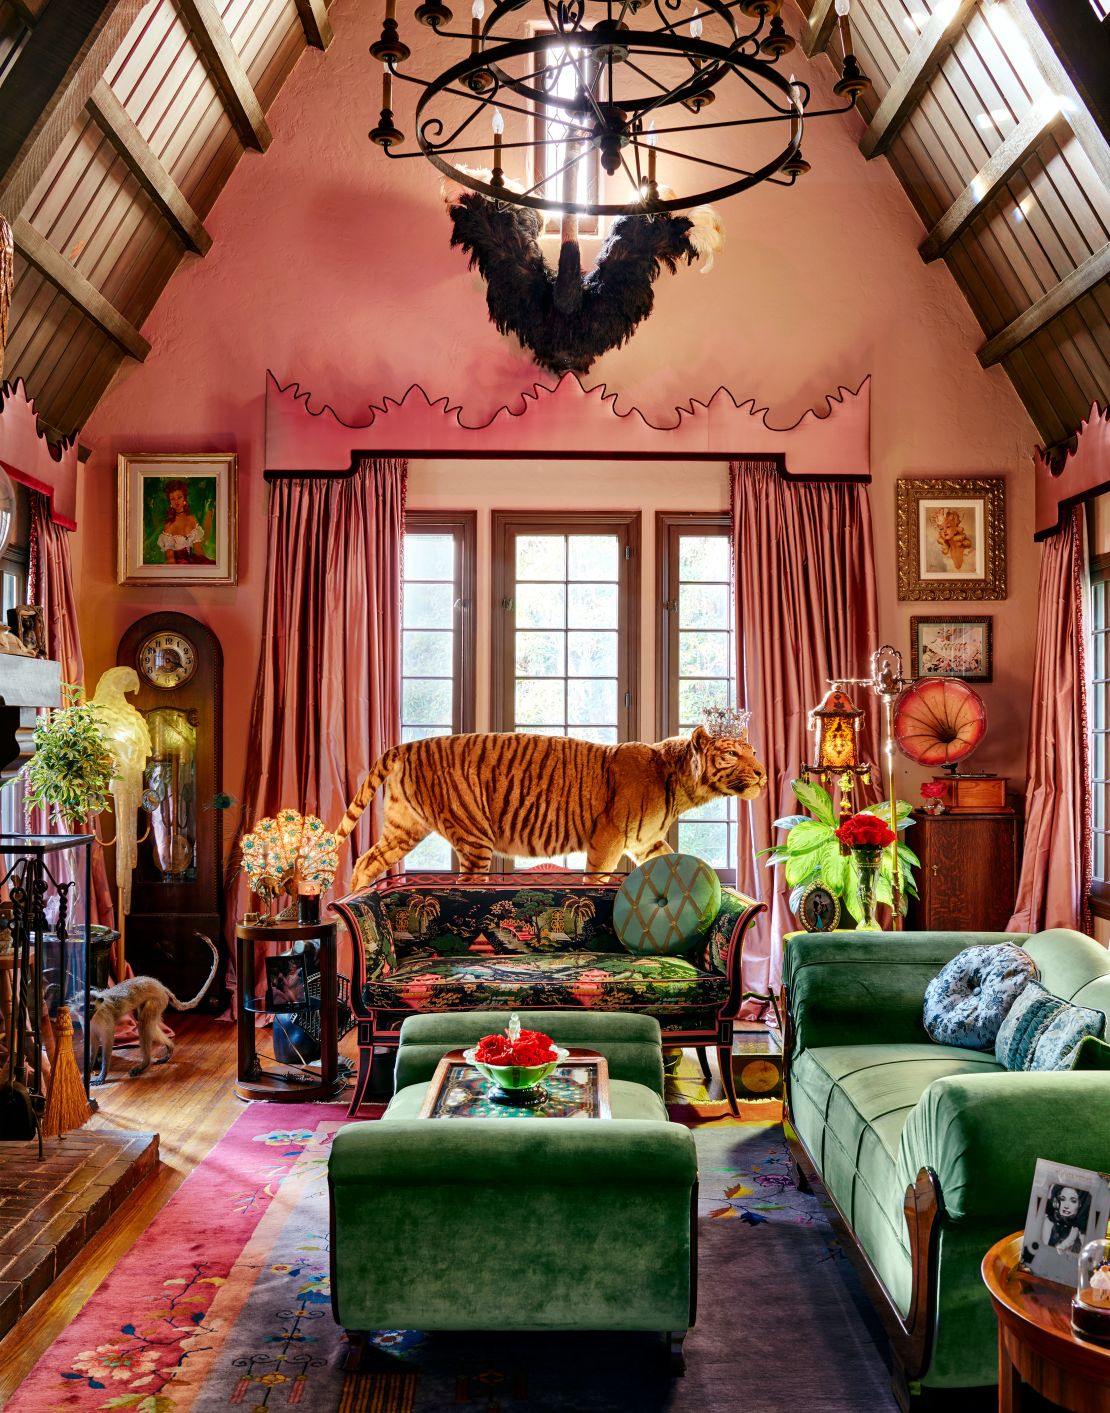 Rich fabrics and exotic objects set a dramatic scene in Von Teese's sitting room